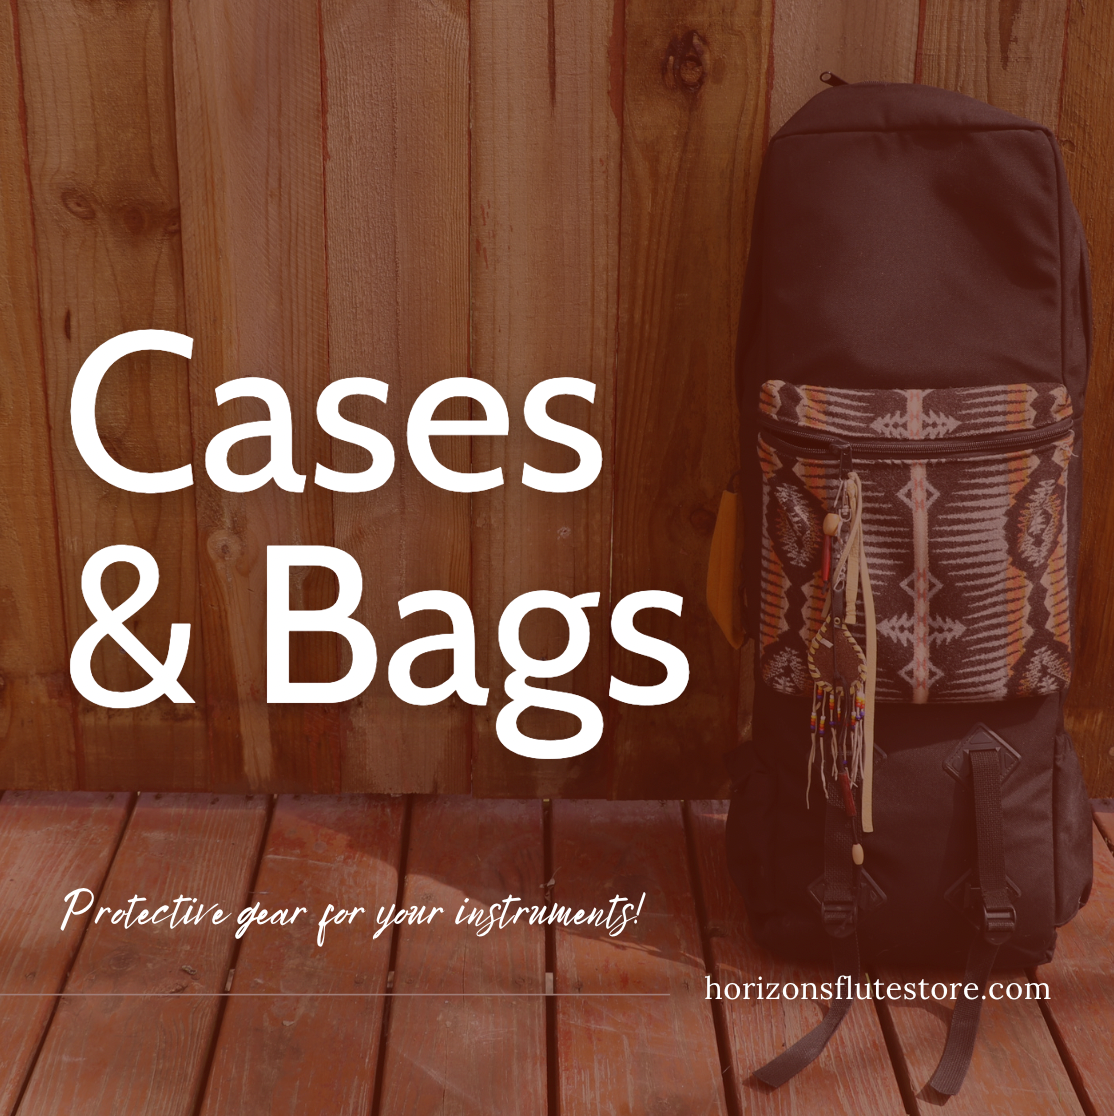 Cases & Bags